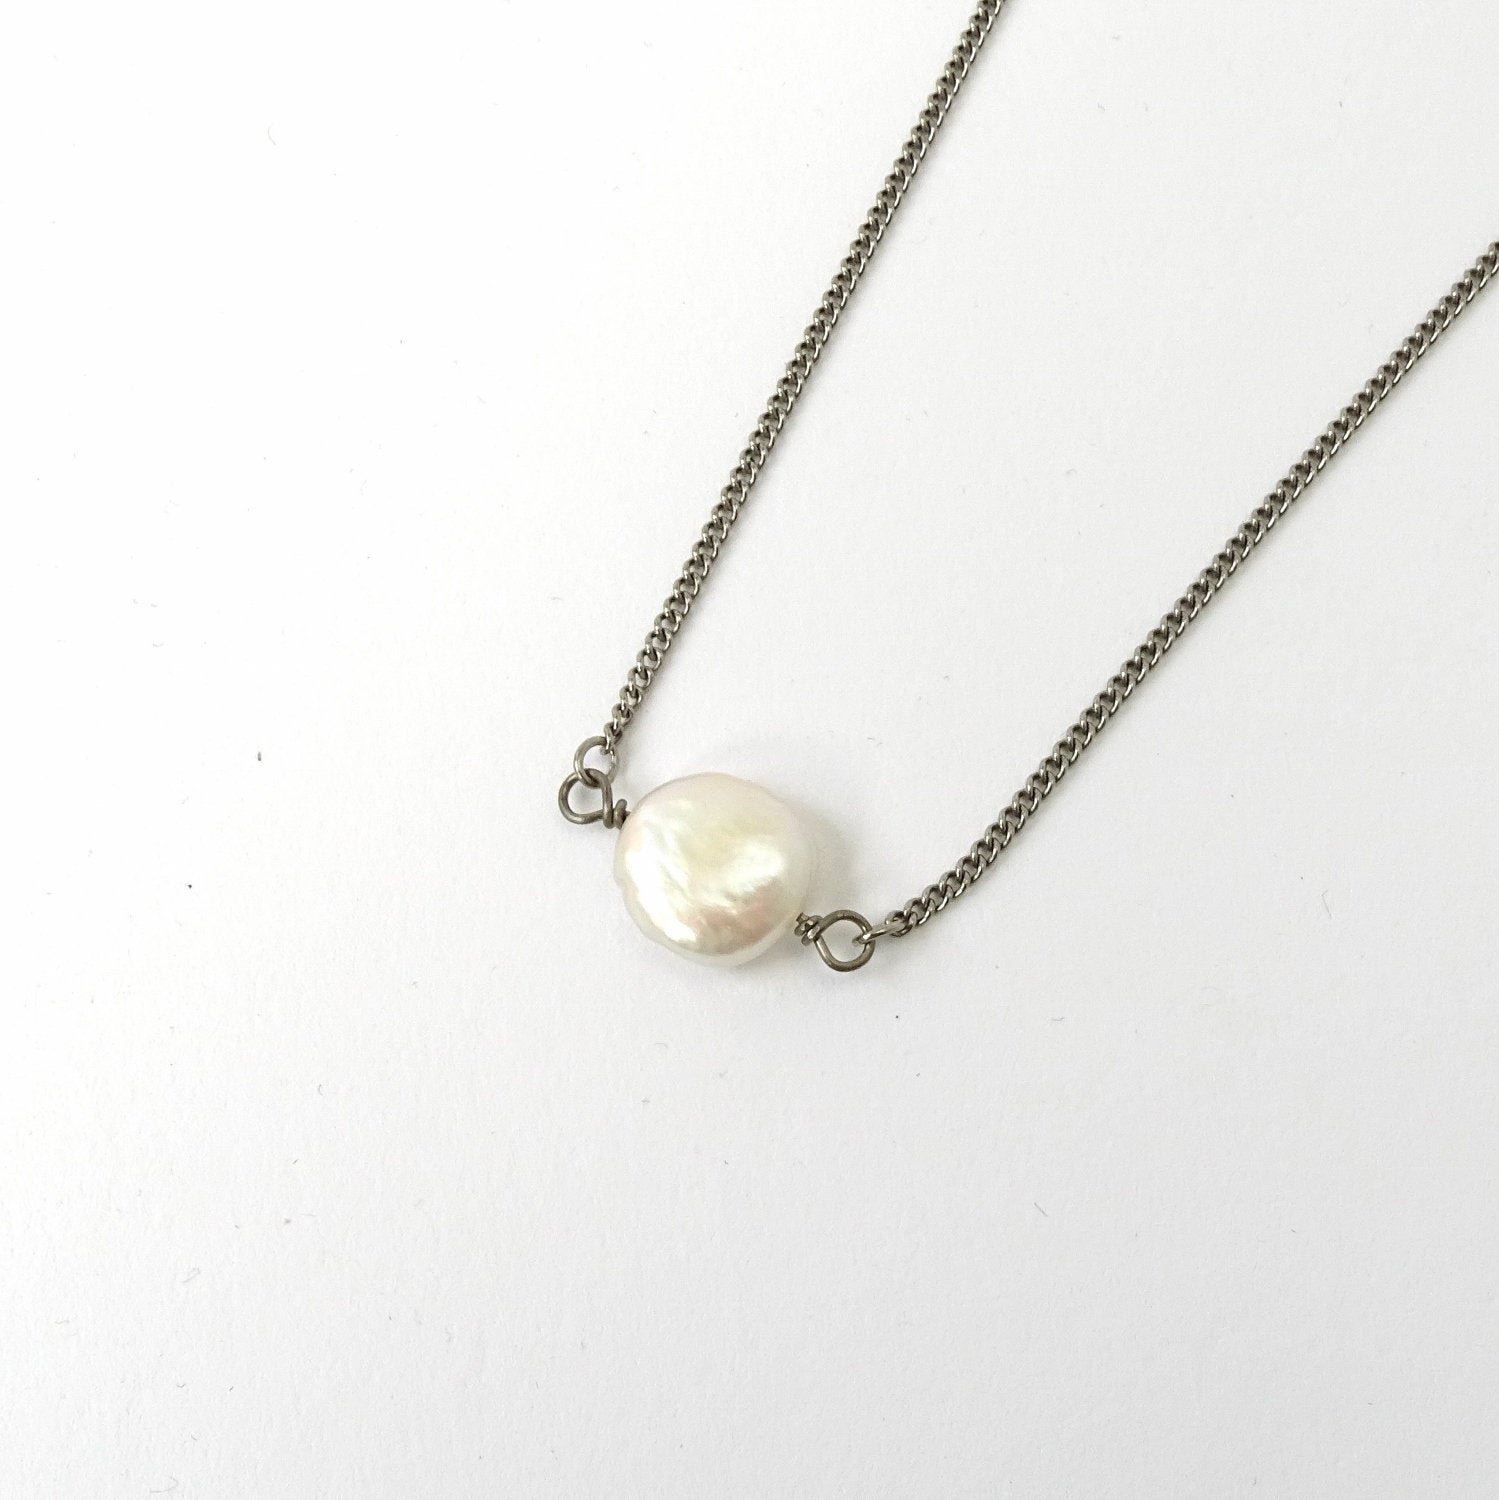 White Coin Pearl Titanium Necklace, Ivory Freshwater Pearl Niobium Bridal Necklace, Hypoallergenic Nickel Free Sensitive Skin Jewelry